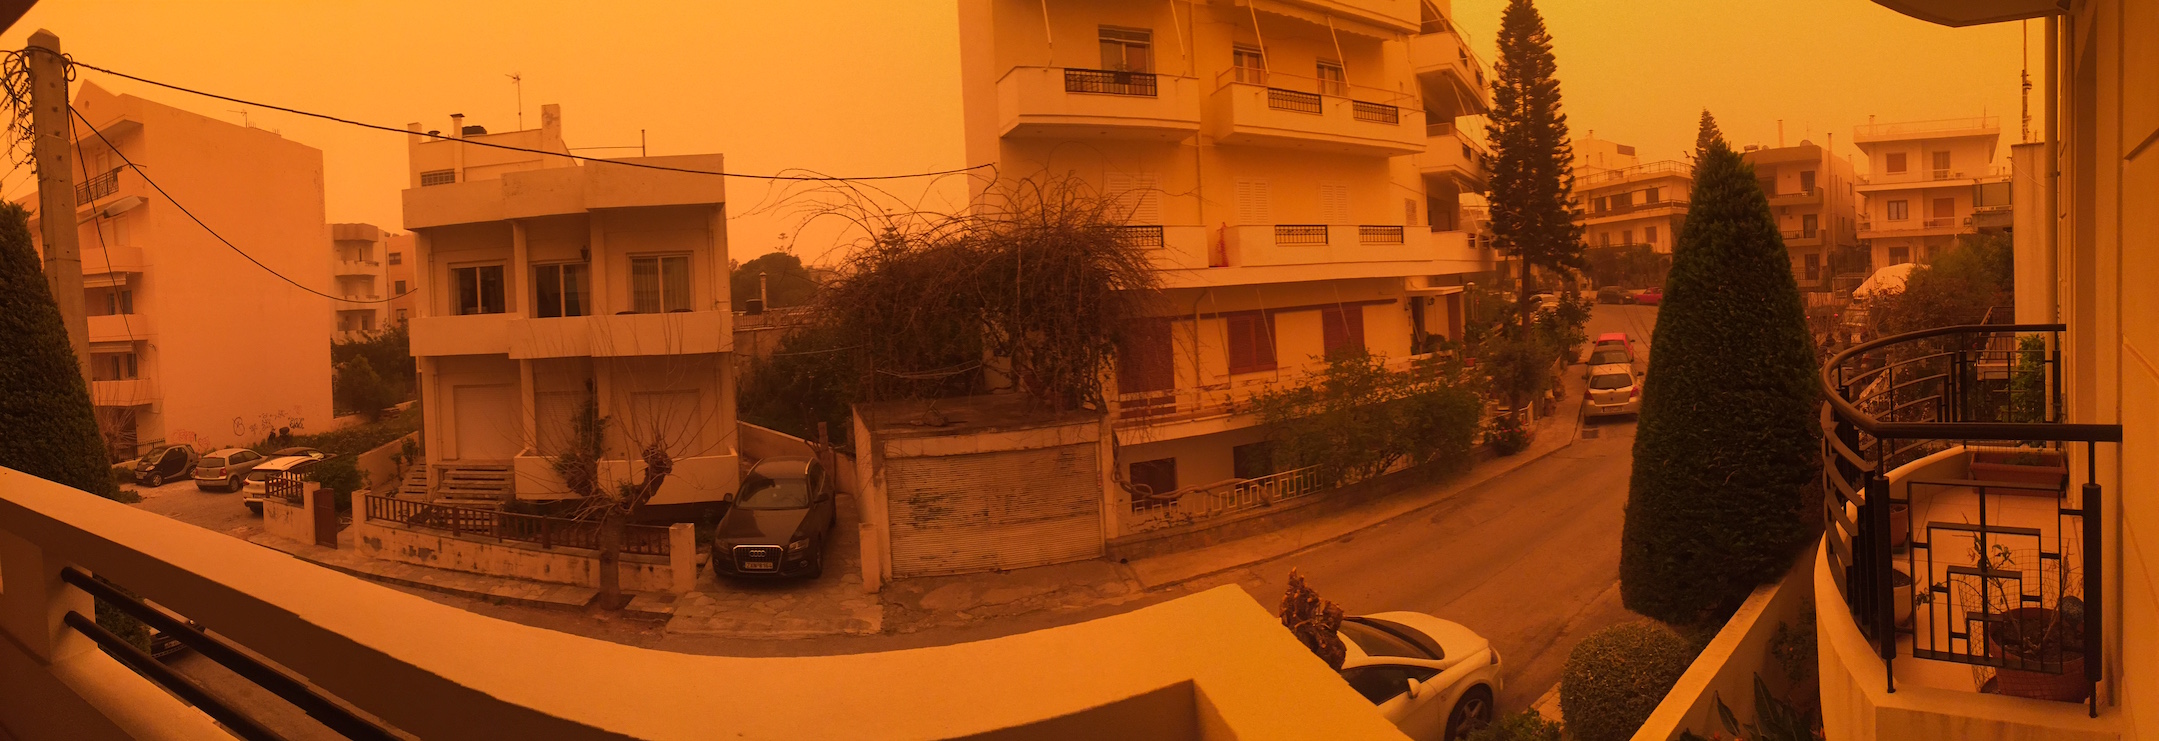 View from my balcony during the Sahara dust incident